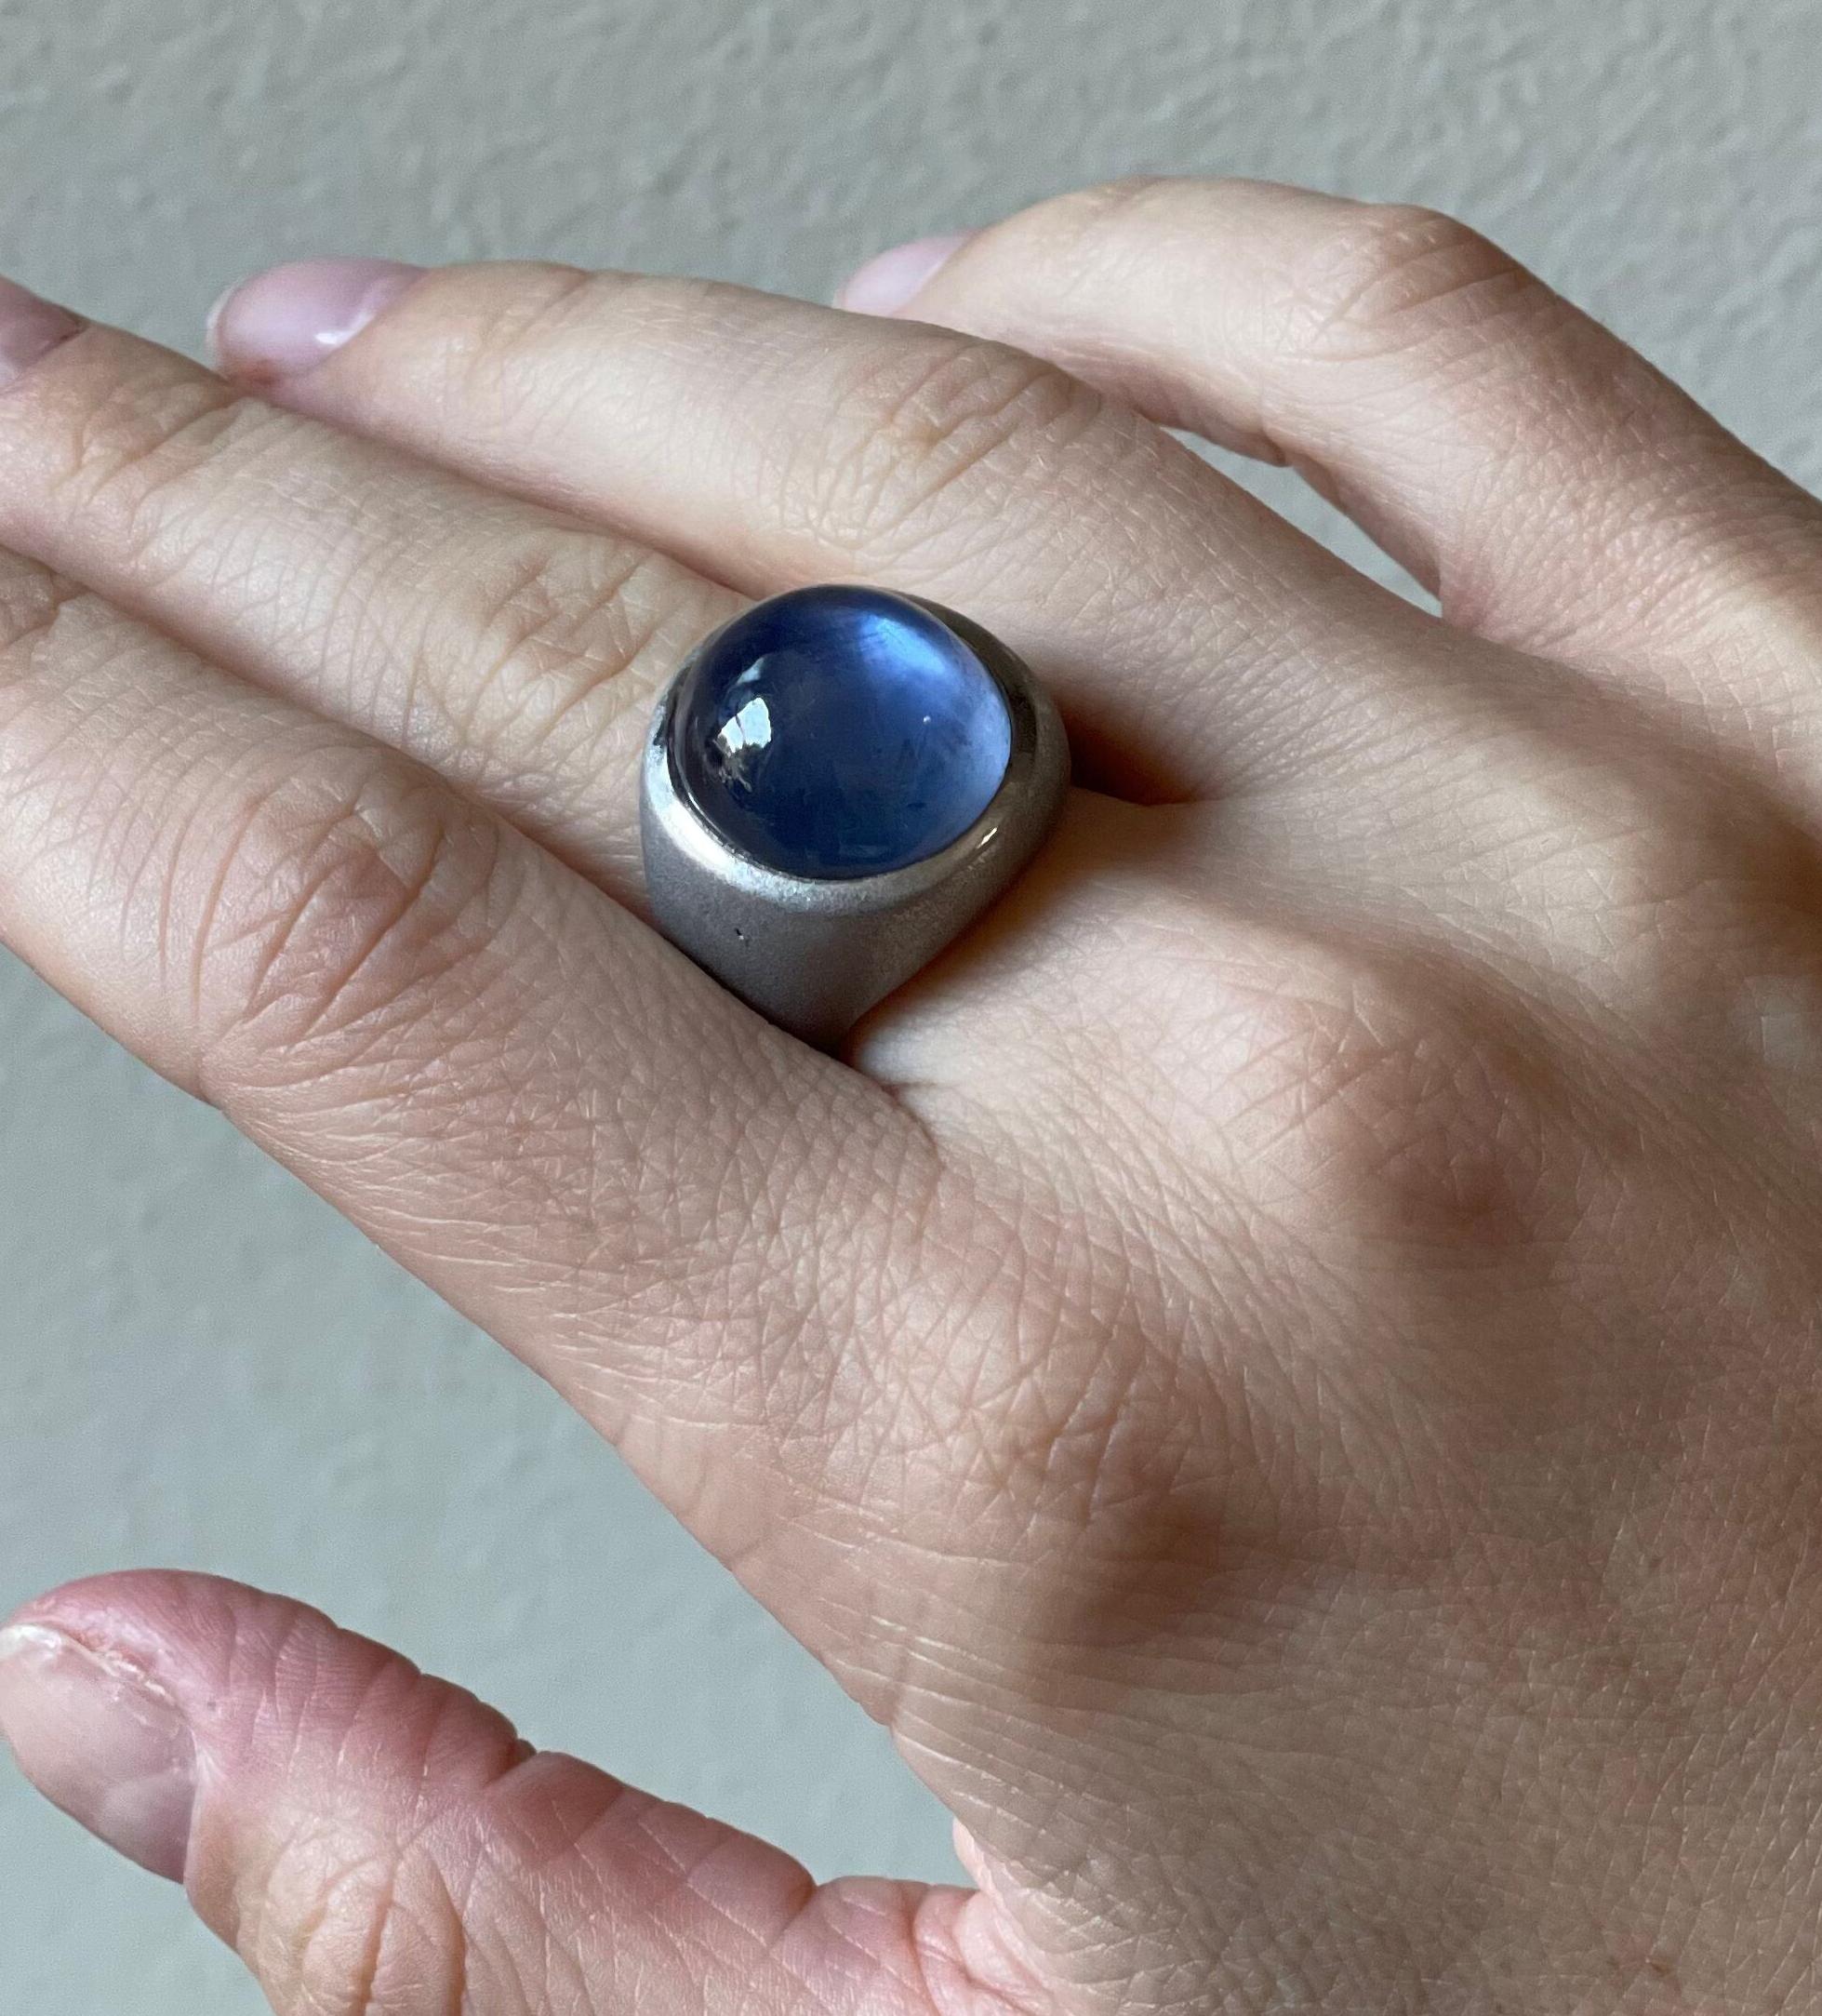 Large platinum brushed finish ring, set with center approx. 26 carat star sapphire cabochon (stone measures 16.2 x 15.5 x 9.5mm). Ring size 8.5, top of the ring is 0.75